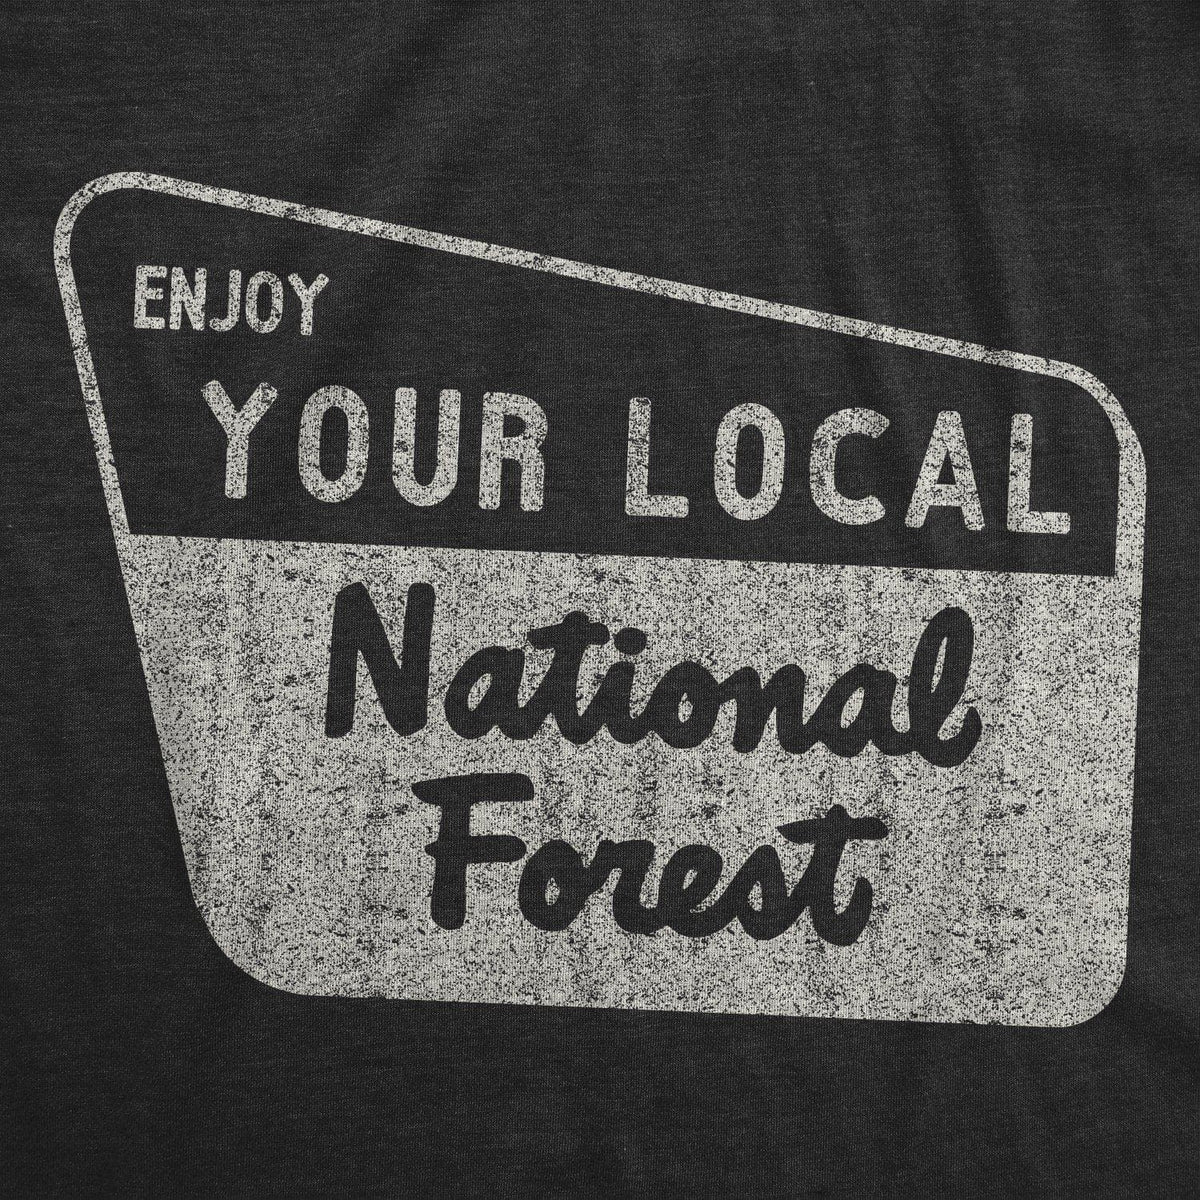 Enjoy Your Local National Forest Men&#39;s Tshirt  -  Crazy Dog T-Shirts